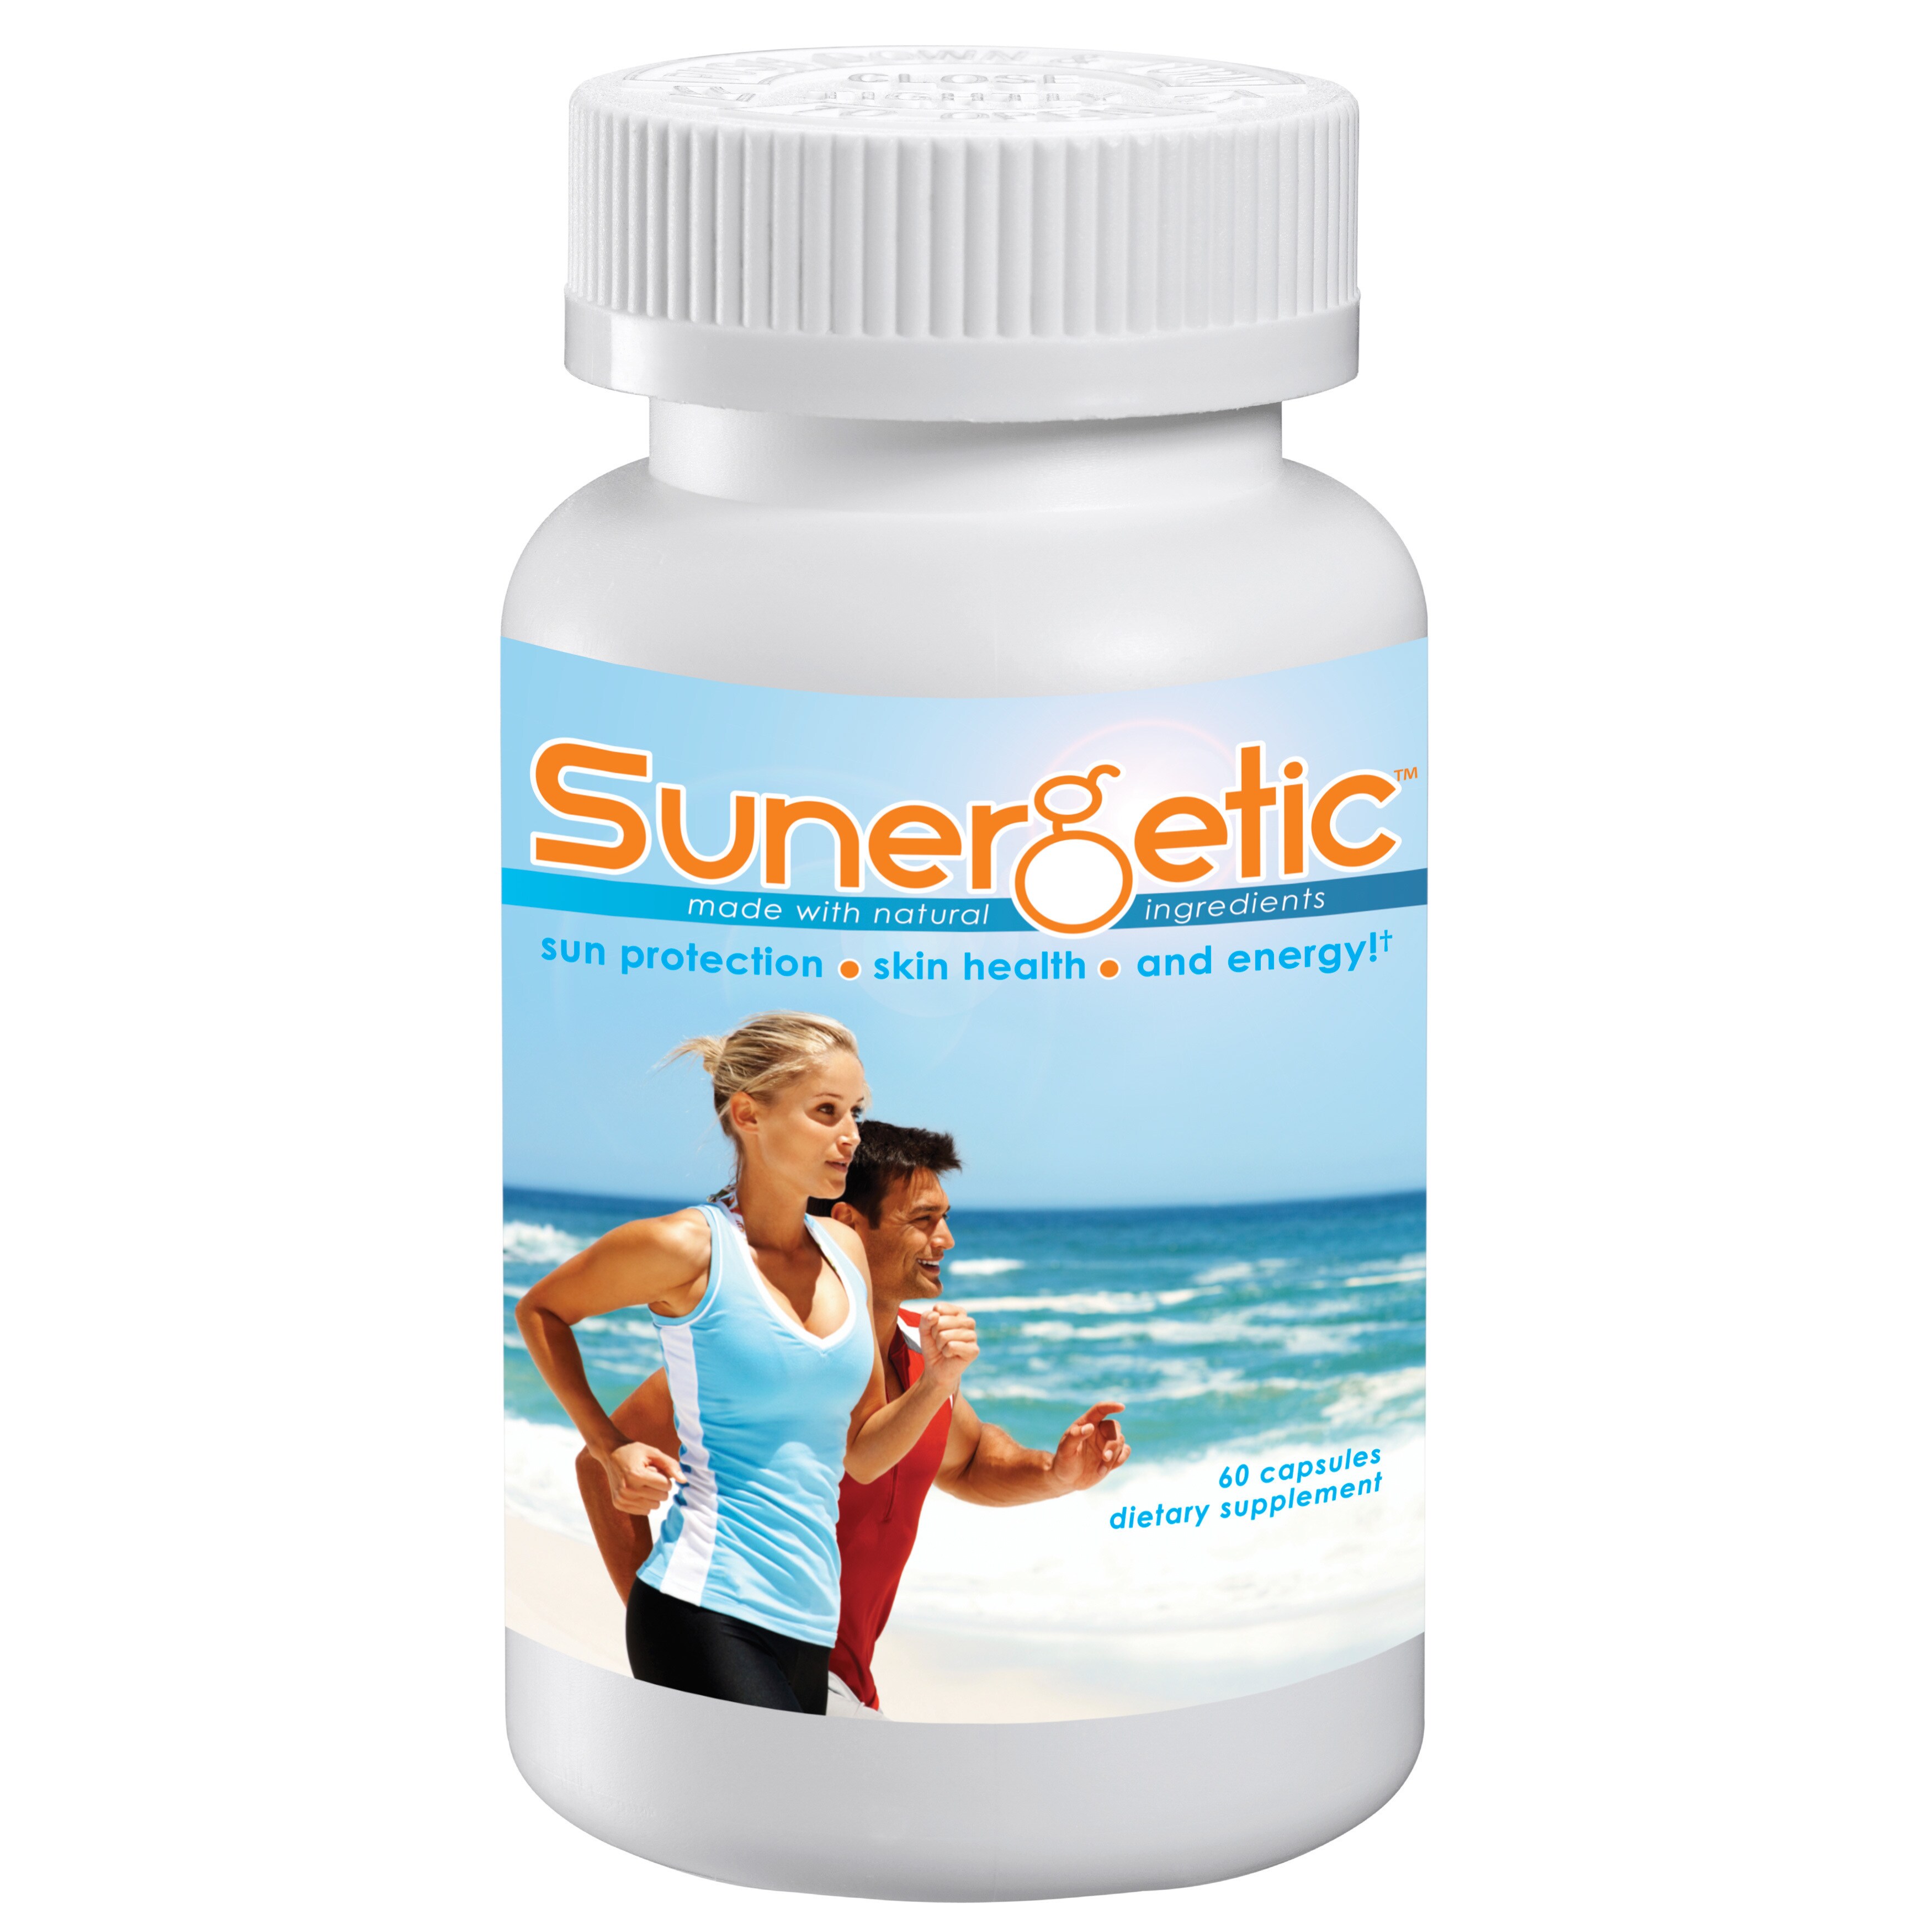 Sunergetic Products And Supplements